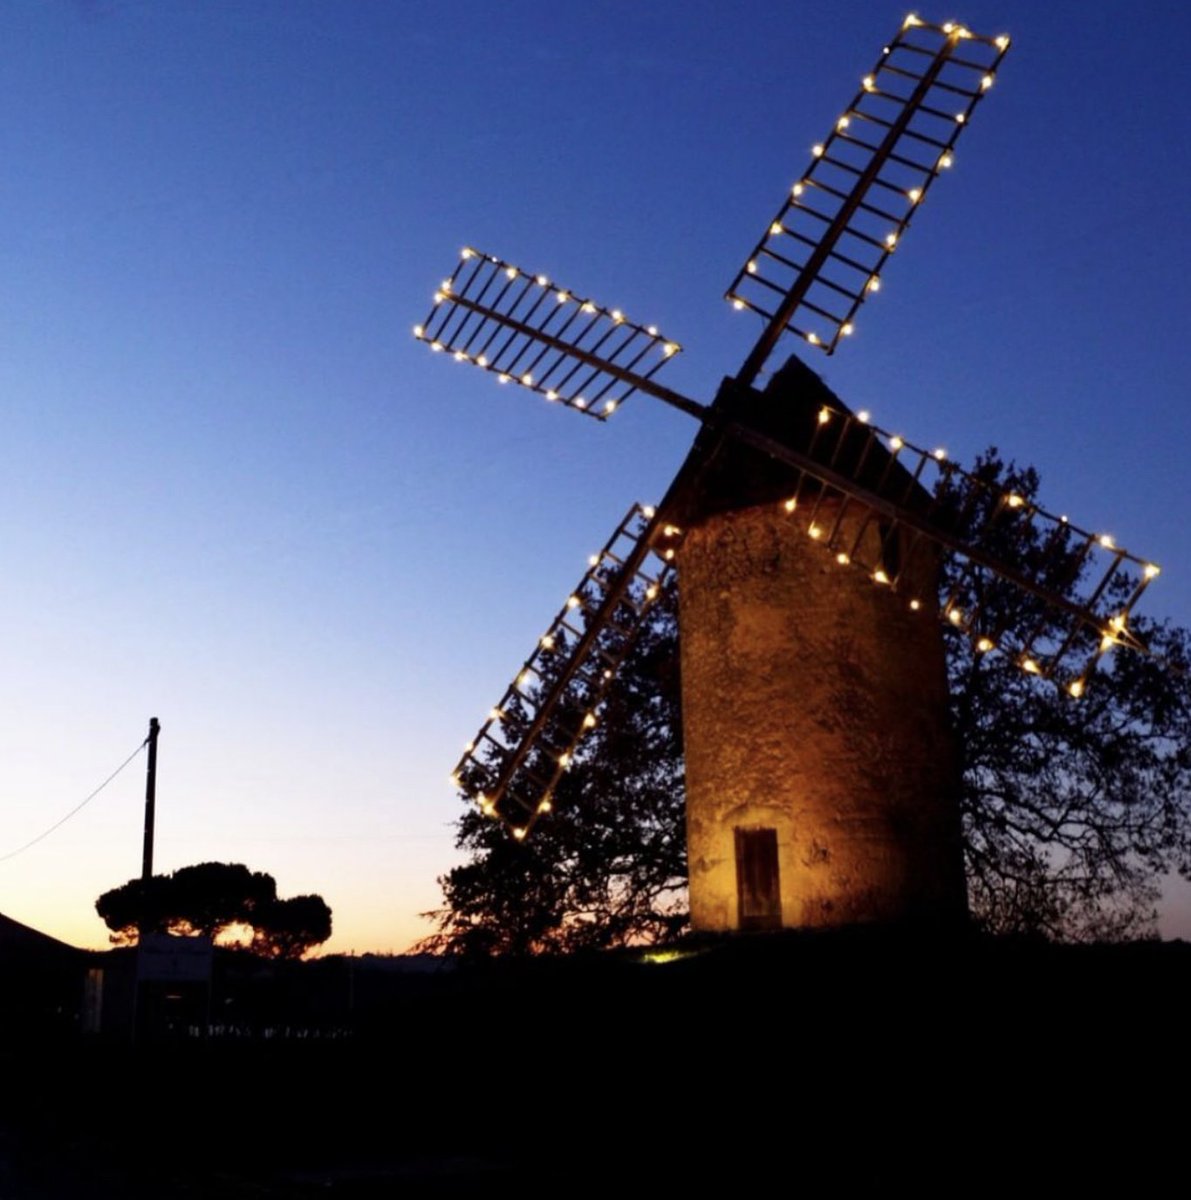 The Bel-Air windmill has been towering over the vineyard of Château de l'Orangerie since the 18th Century ✨ Towards the end of the year, it lights up the night in the Entre-deux-Mers region & can be spotted from just over 40km away in Saint-Félix village! #VisitBordeaux